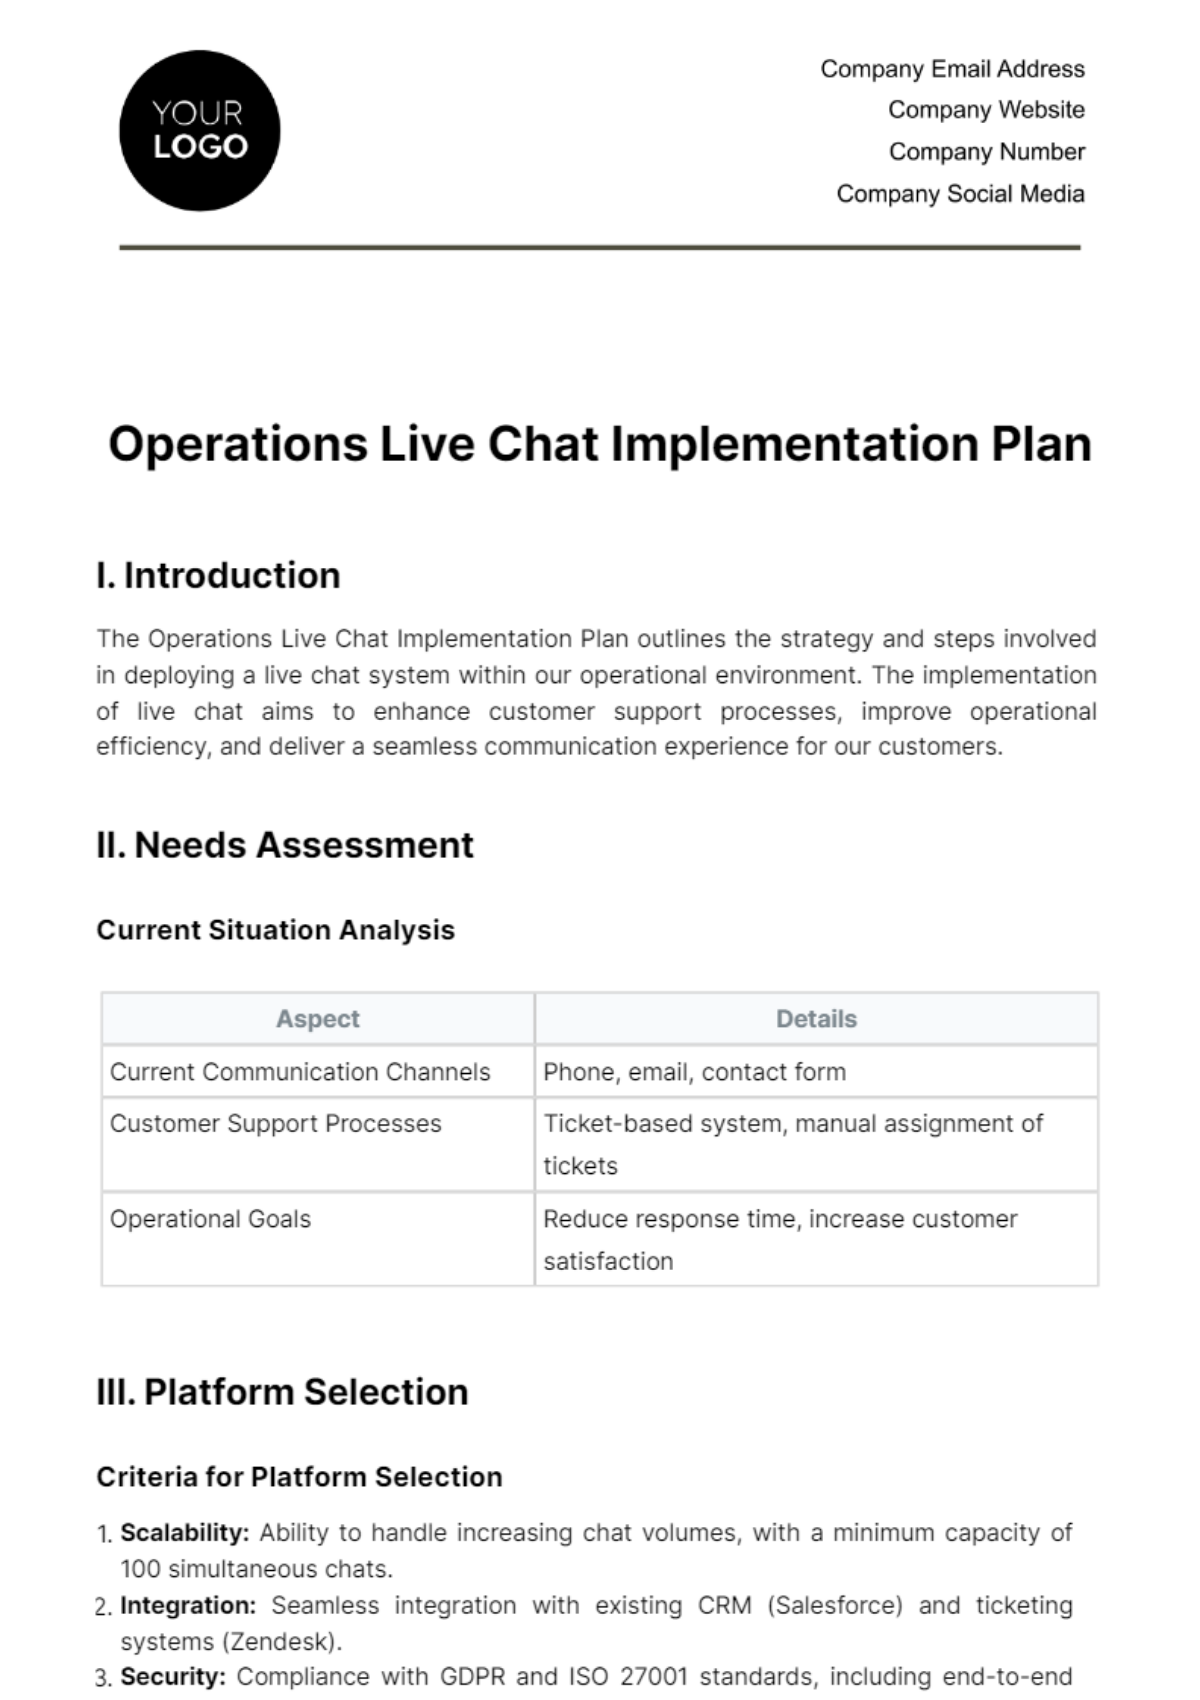 Free Operations Live Chat Implementation Plan Template